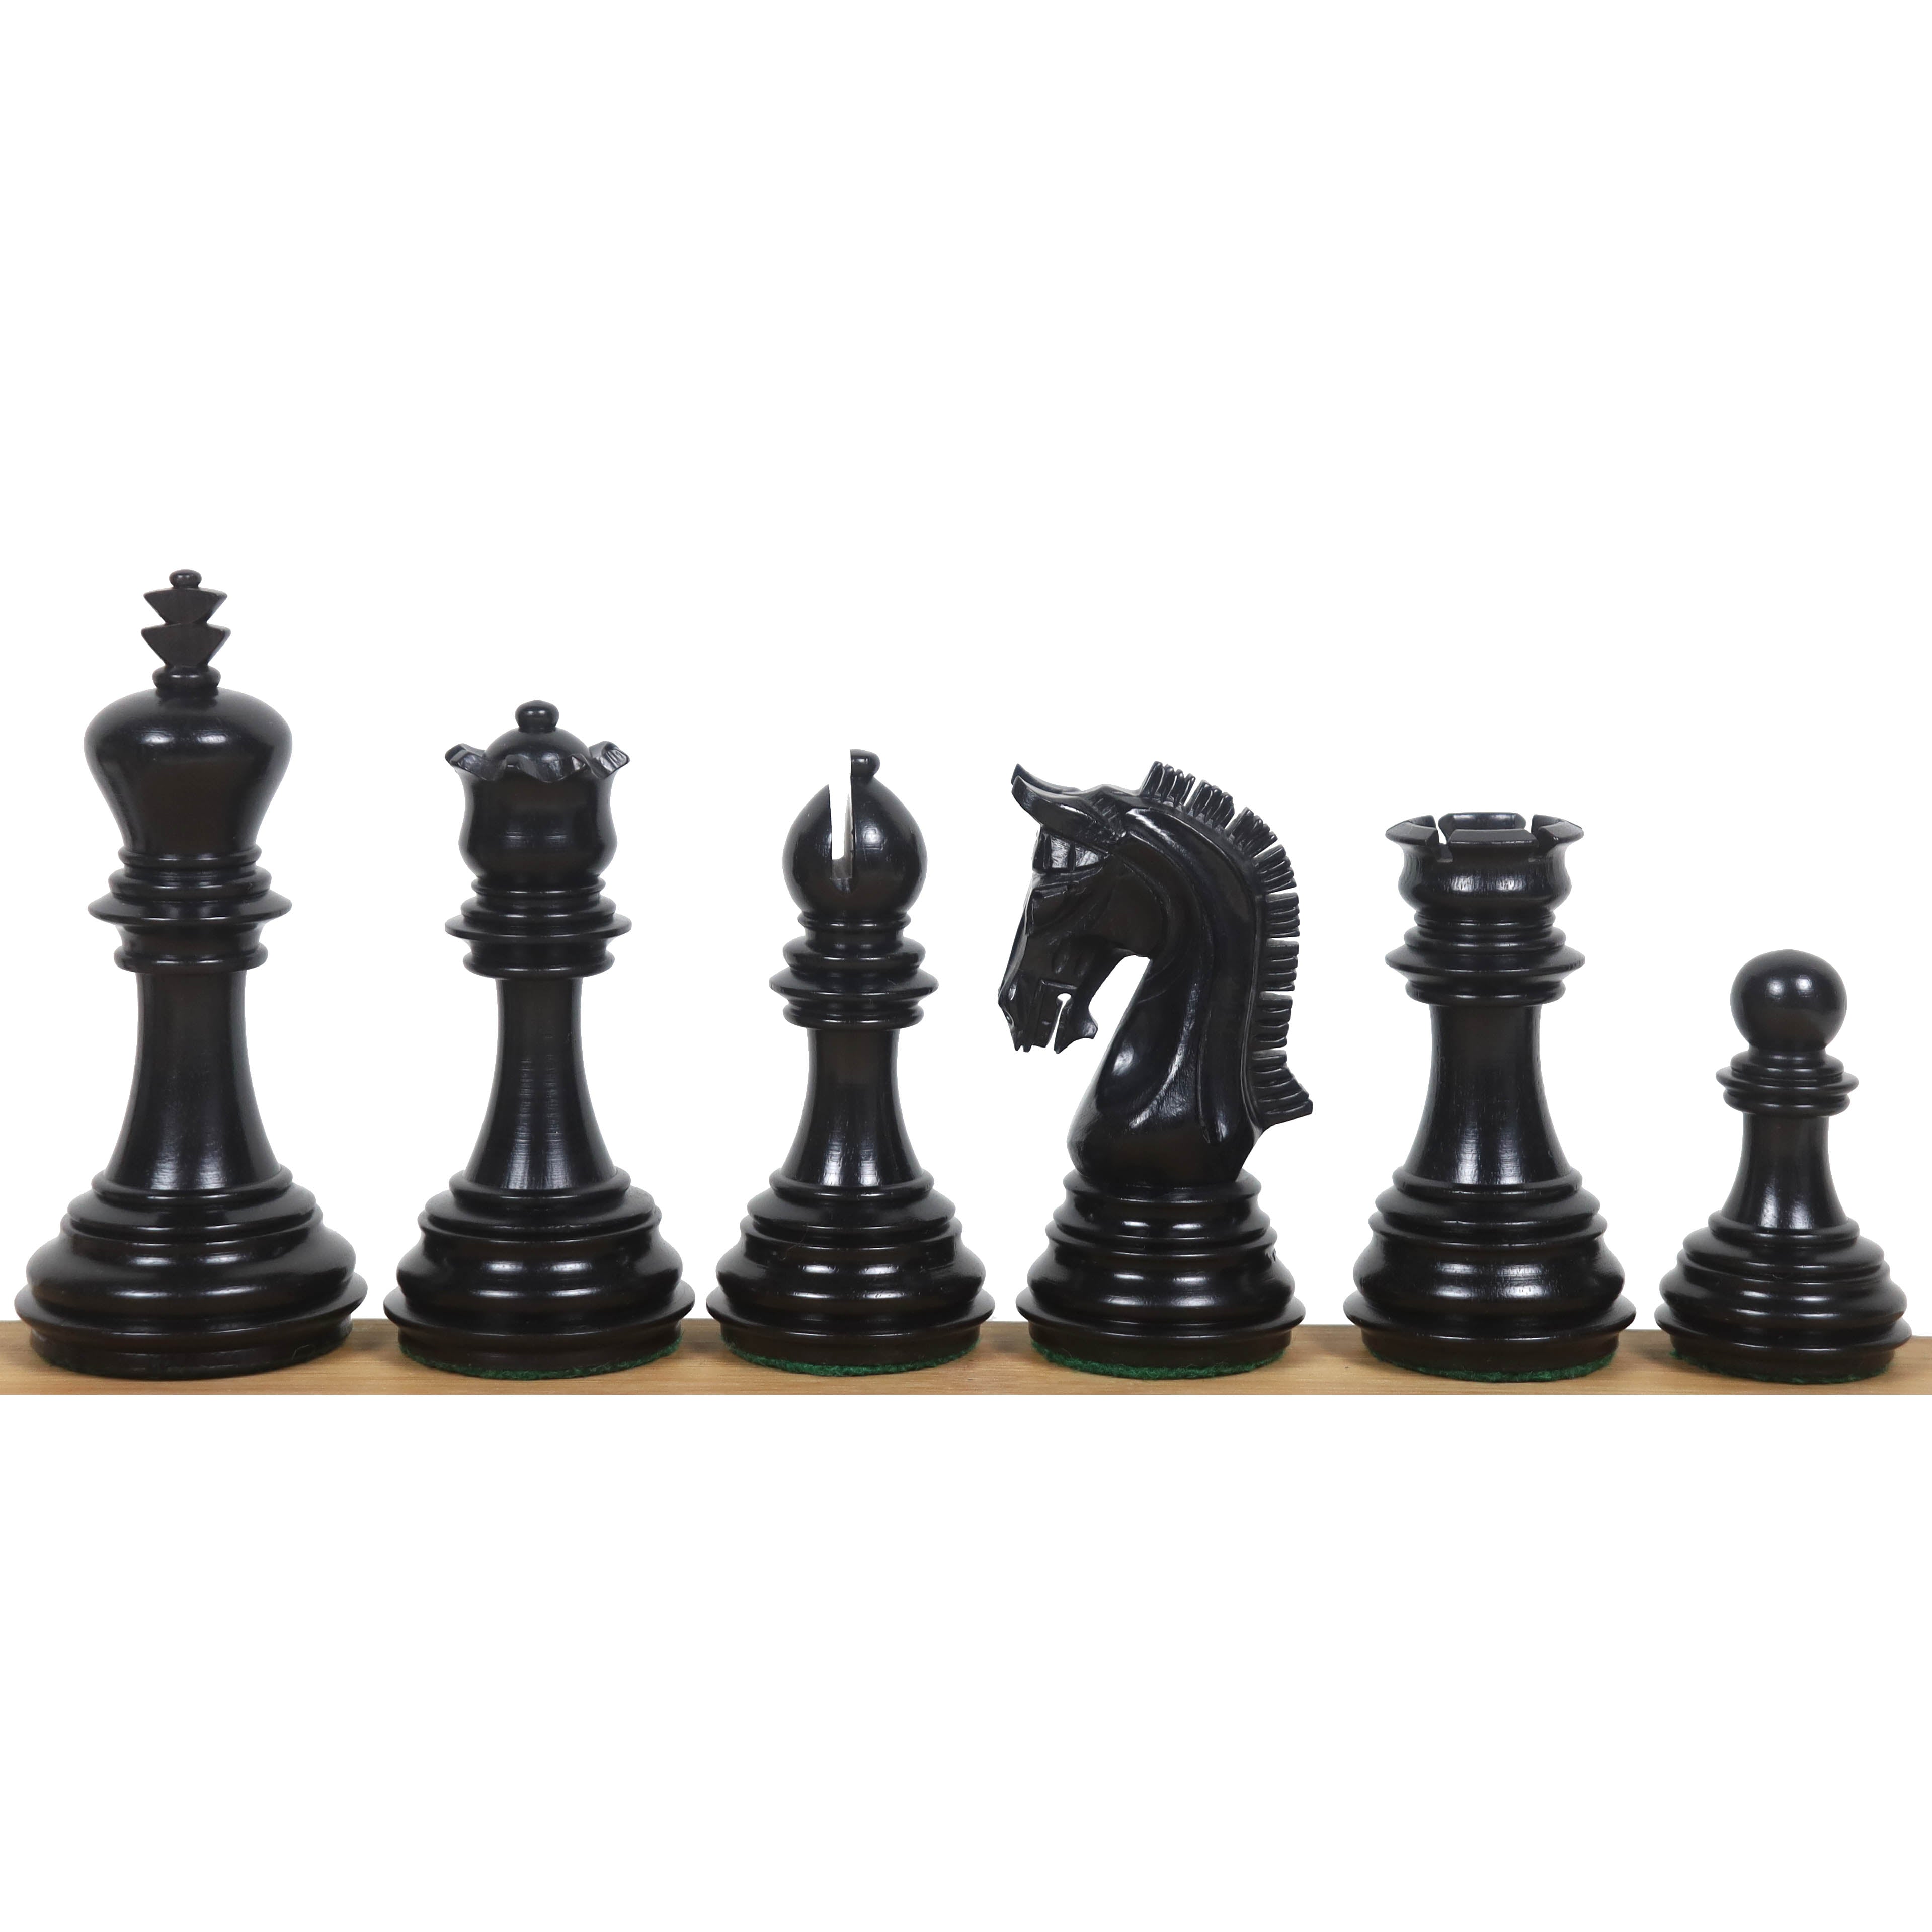 3.8" Imperial Staunton Luxury Chess Pieces Only Set - Weighted Ebony Wood